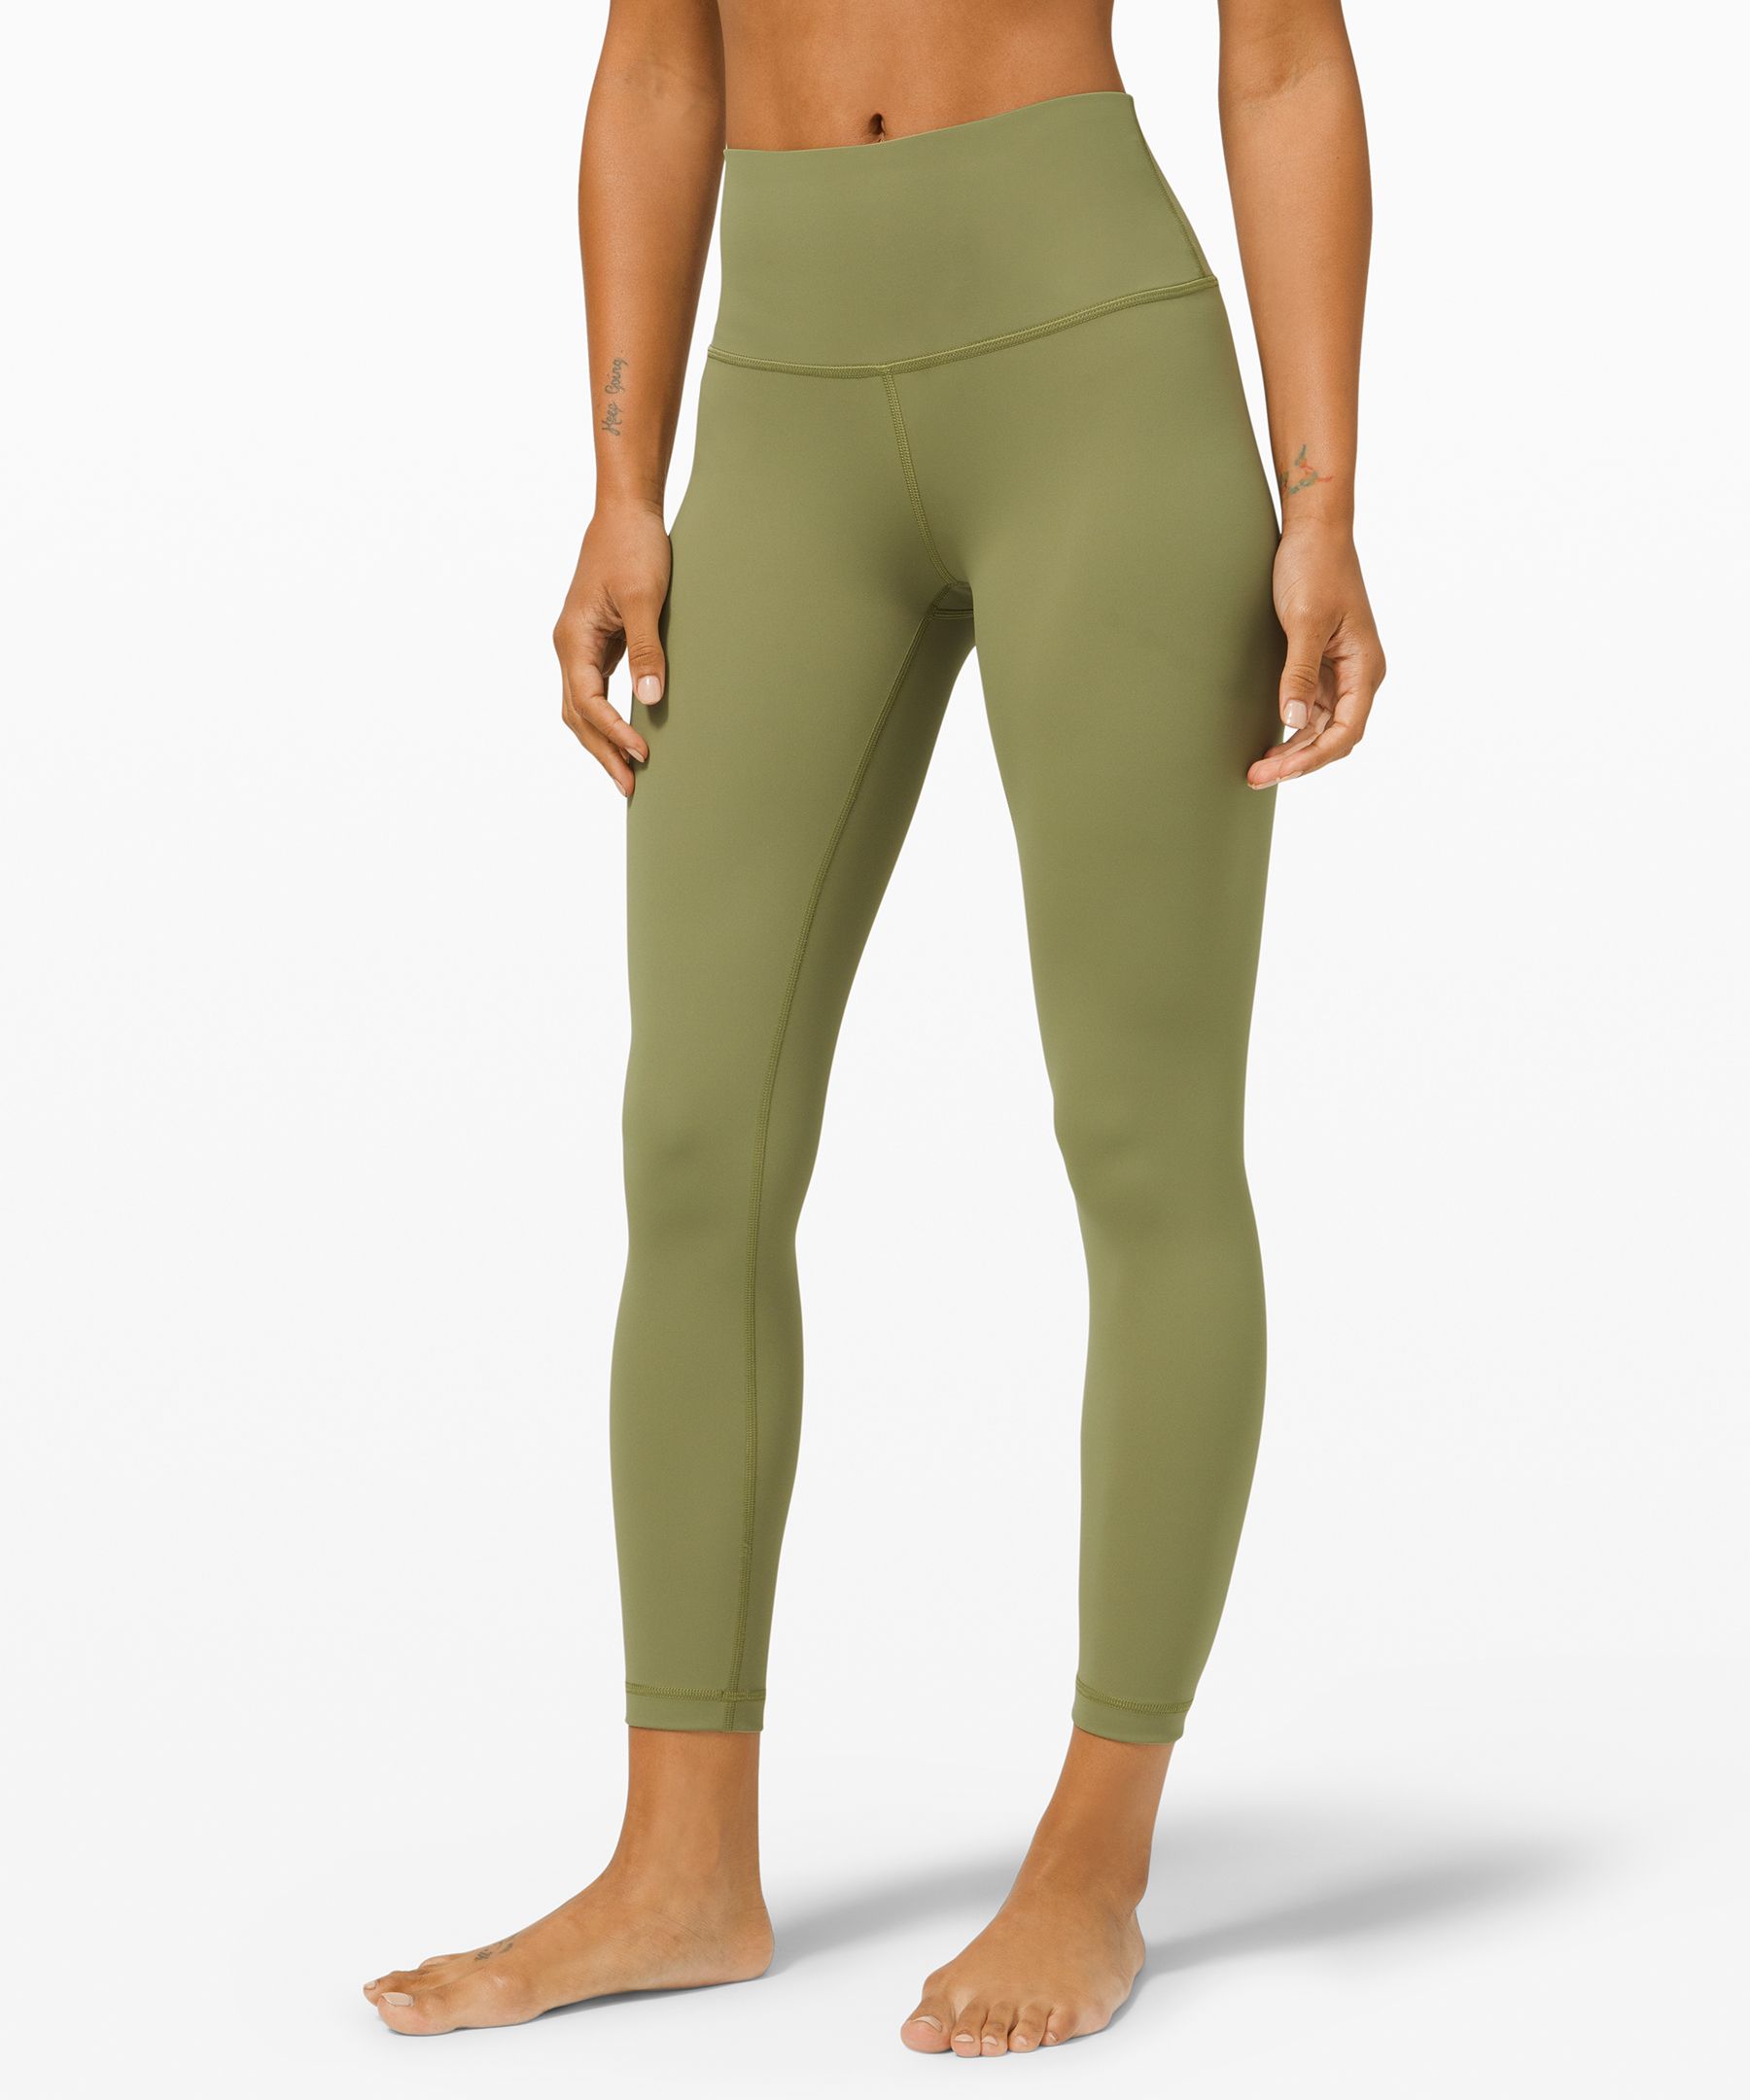 Lululemon Wunder Under High-Rise Tight 25 *Luxtreme - Incognito